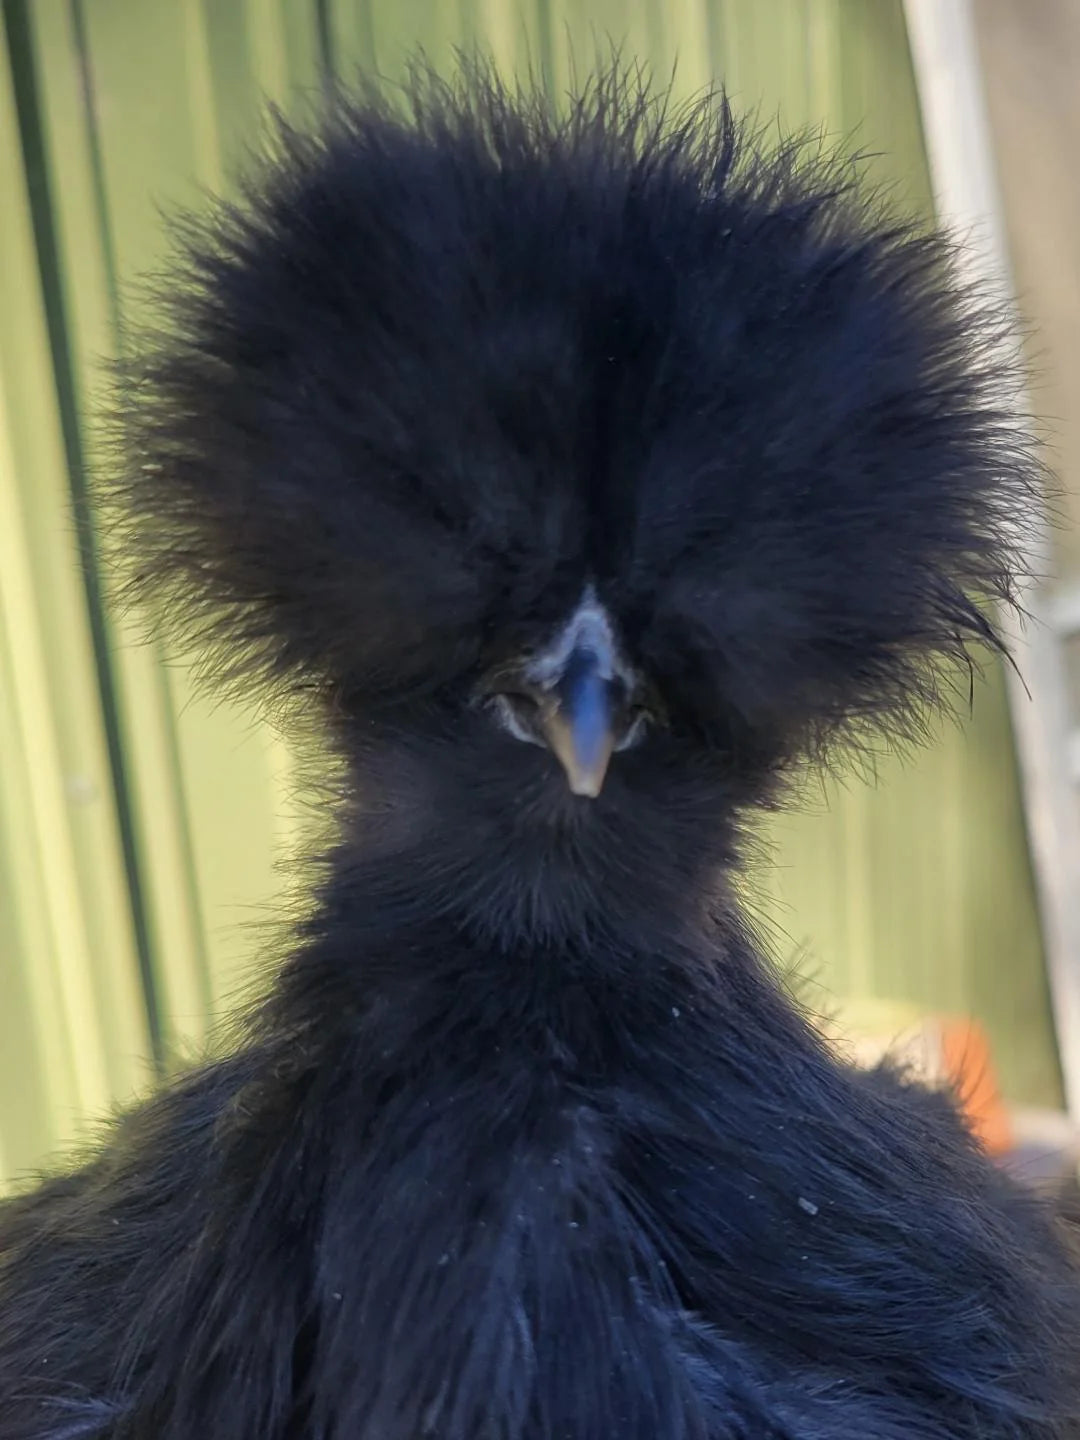 Silkie Bearded Crested Started Young Pullet Hens